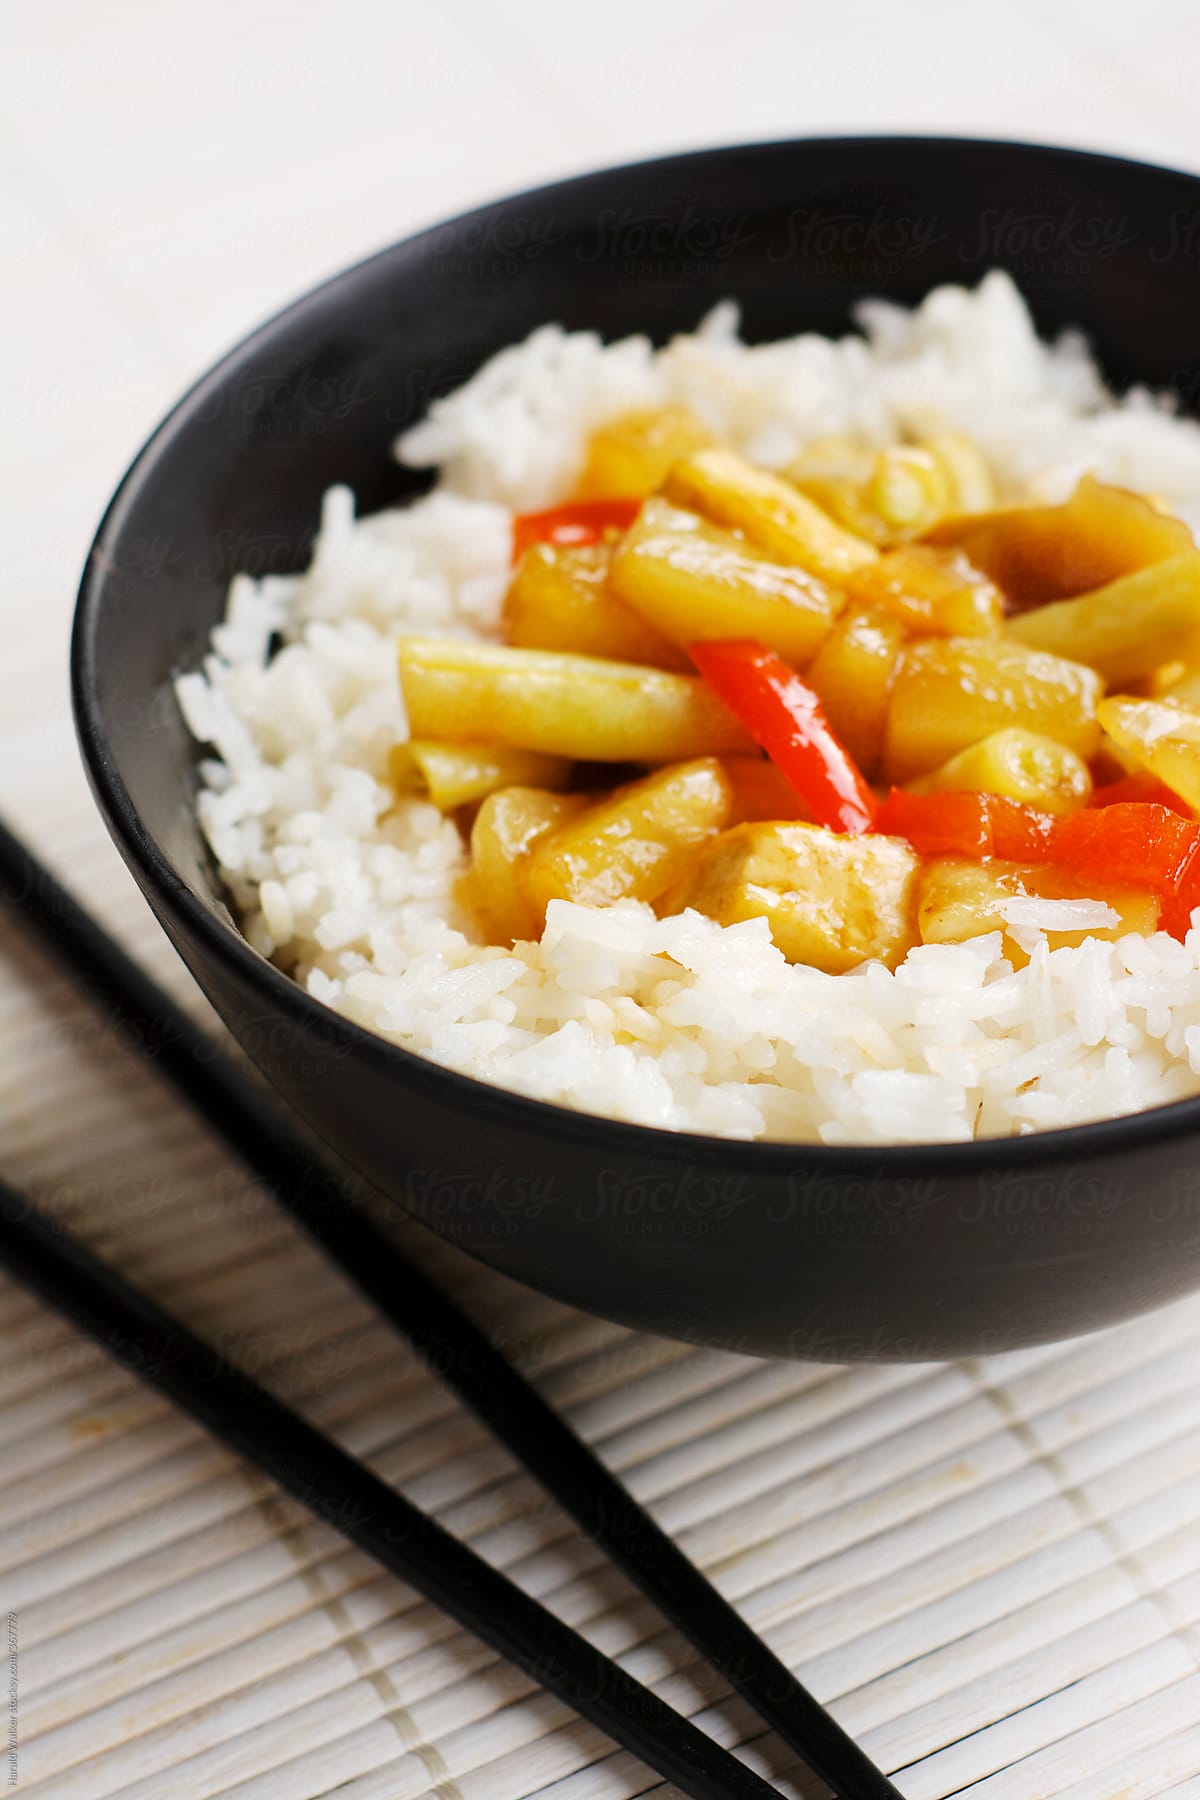 Sweet and sour tofu on rice